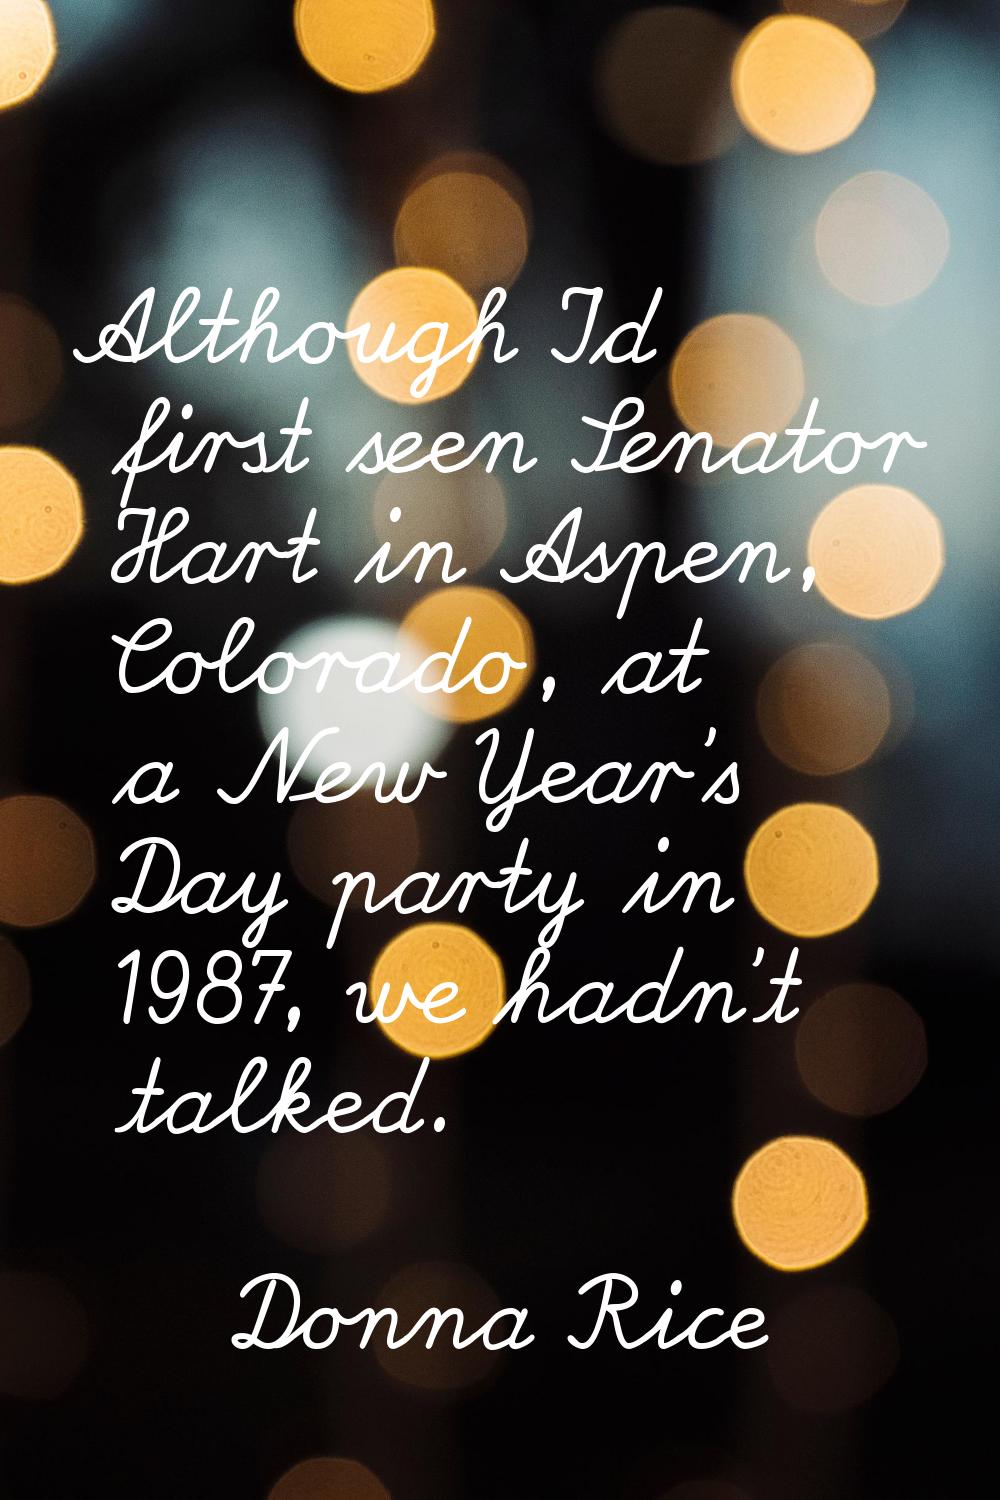 Although I'd first seen Senator Hart in Aspen, Colorado, at a New Year's Day party in 1987, we hadn